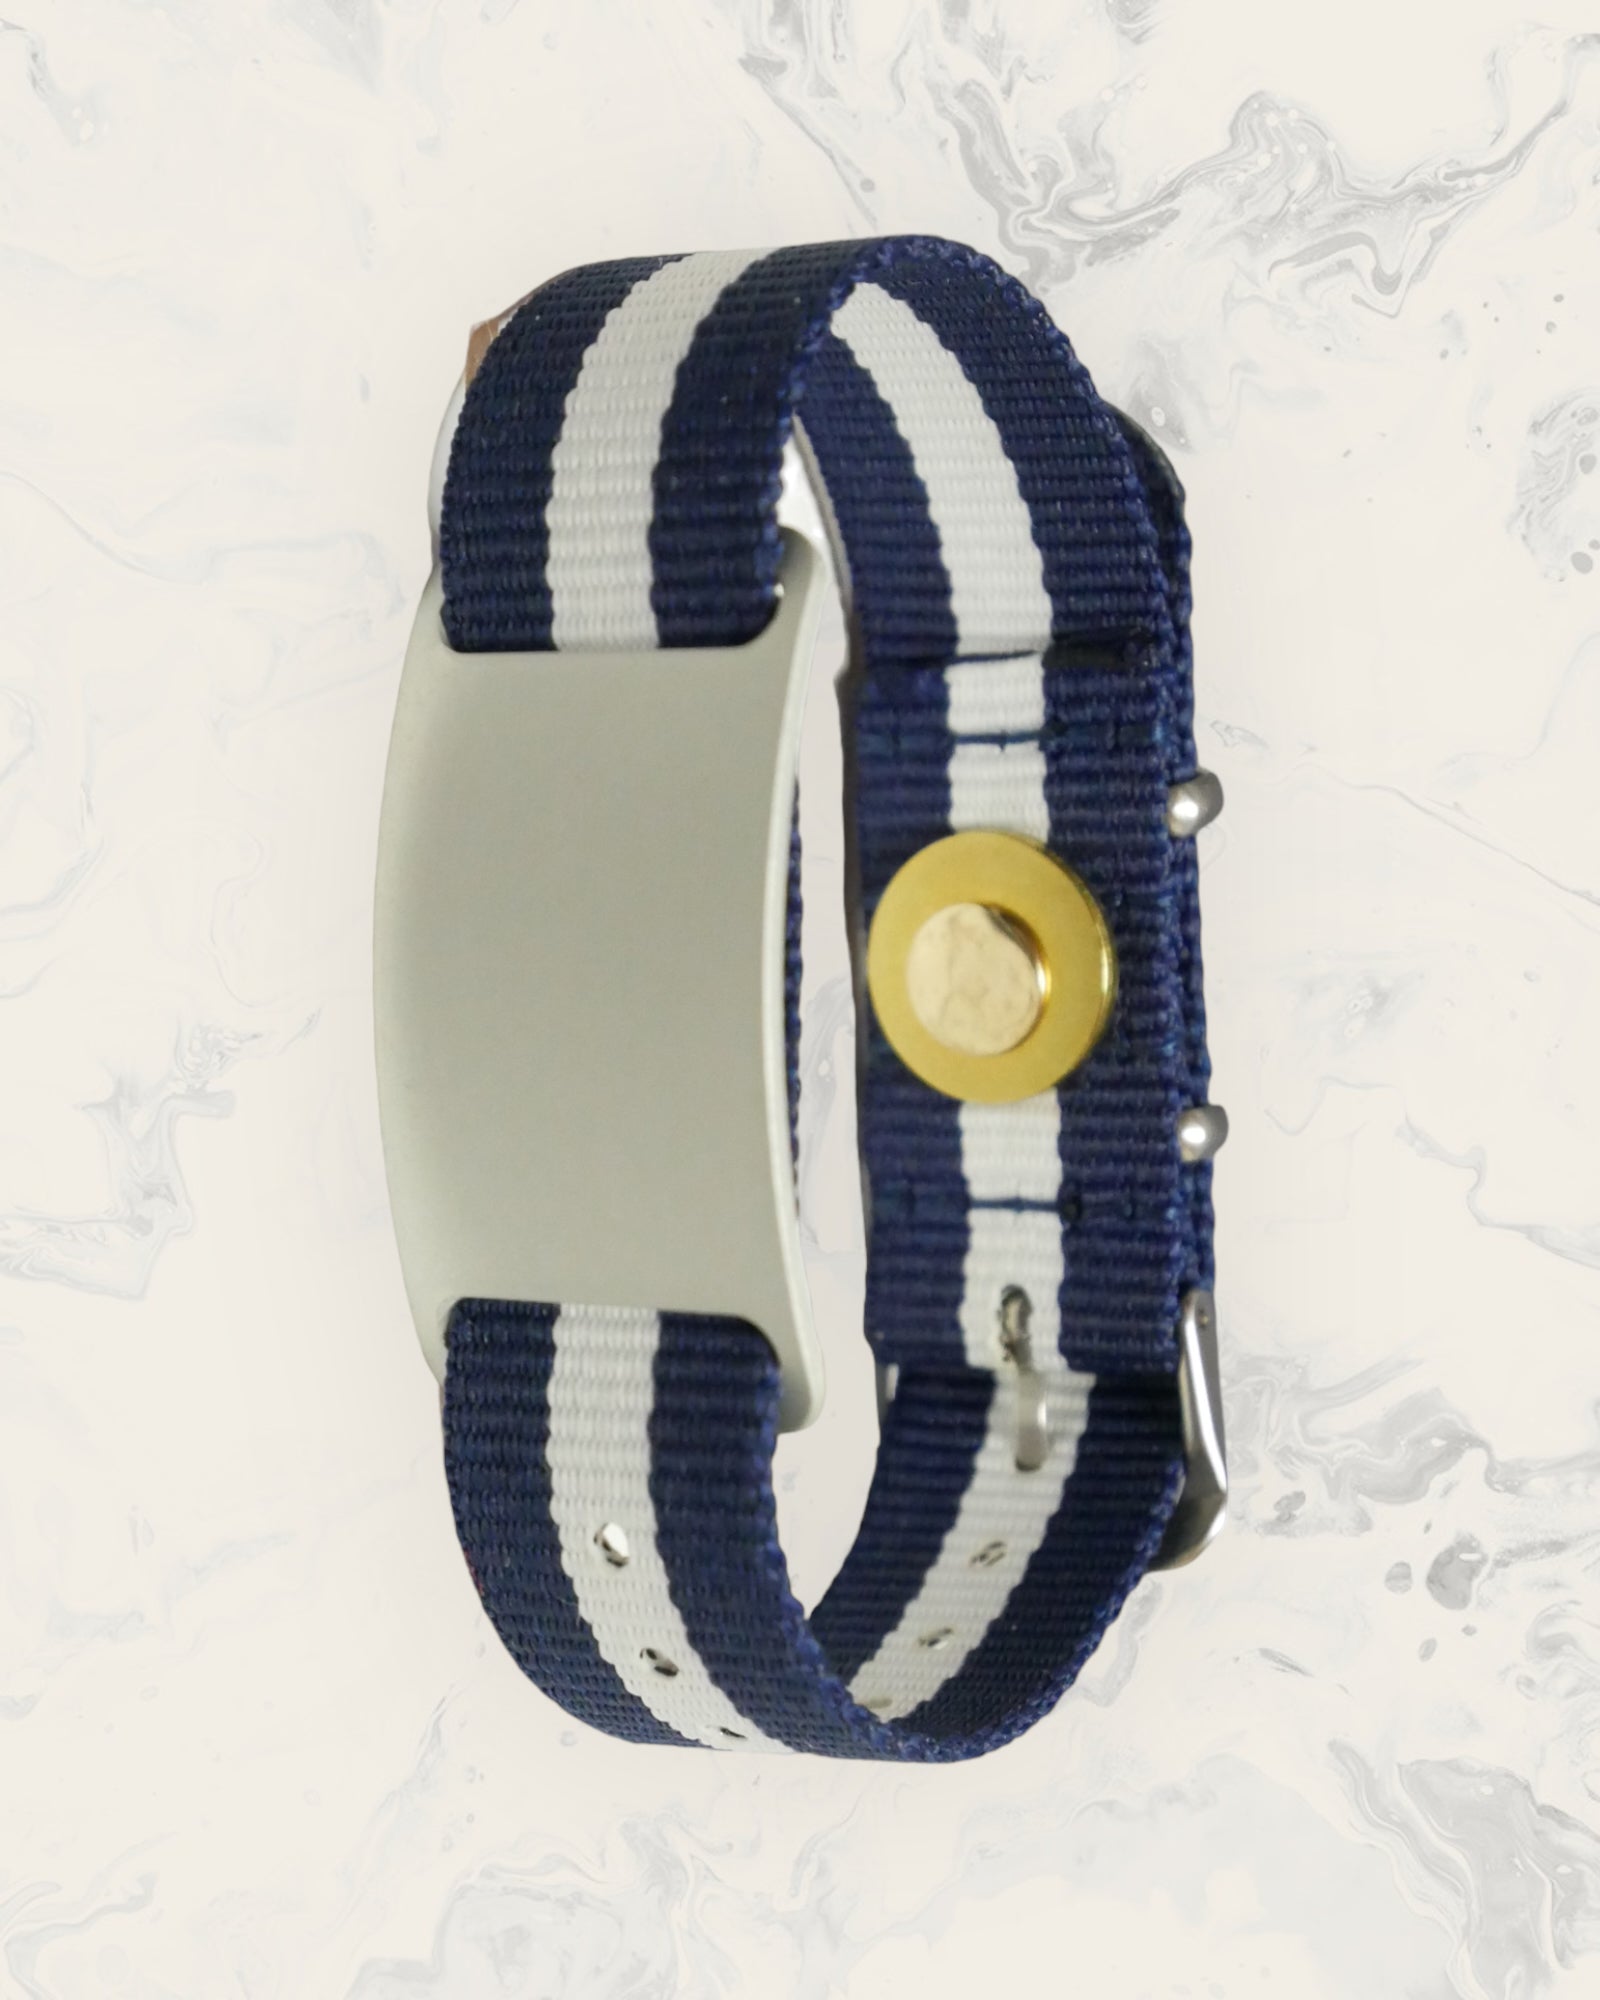 Natural Pain Relief and EMF Protection Bracelet Nylon Band Color Navy Blue and White Striped with a Silver Slider